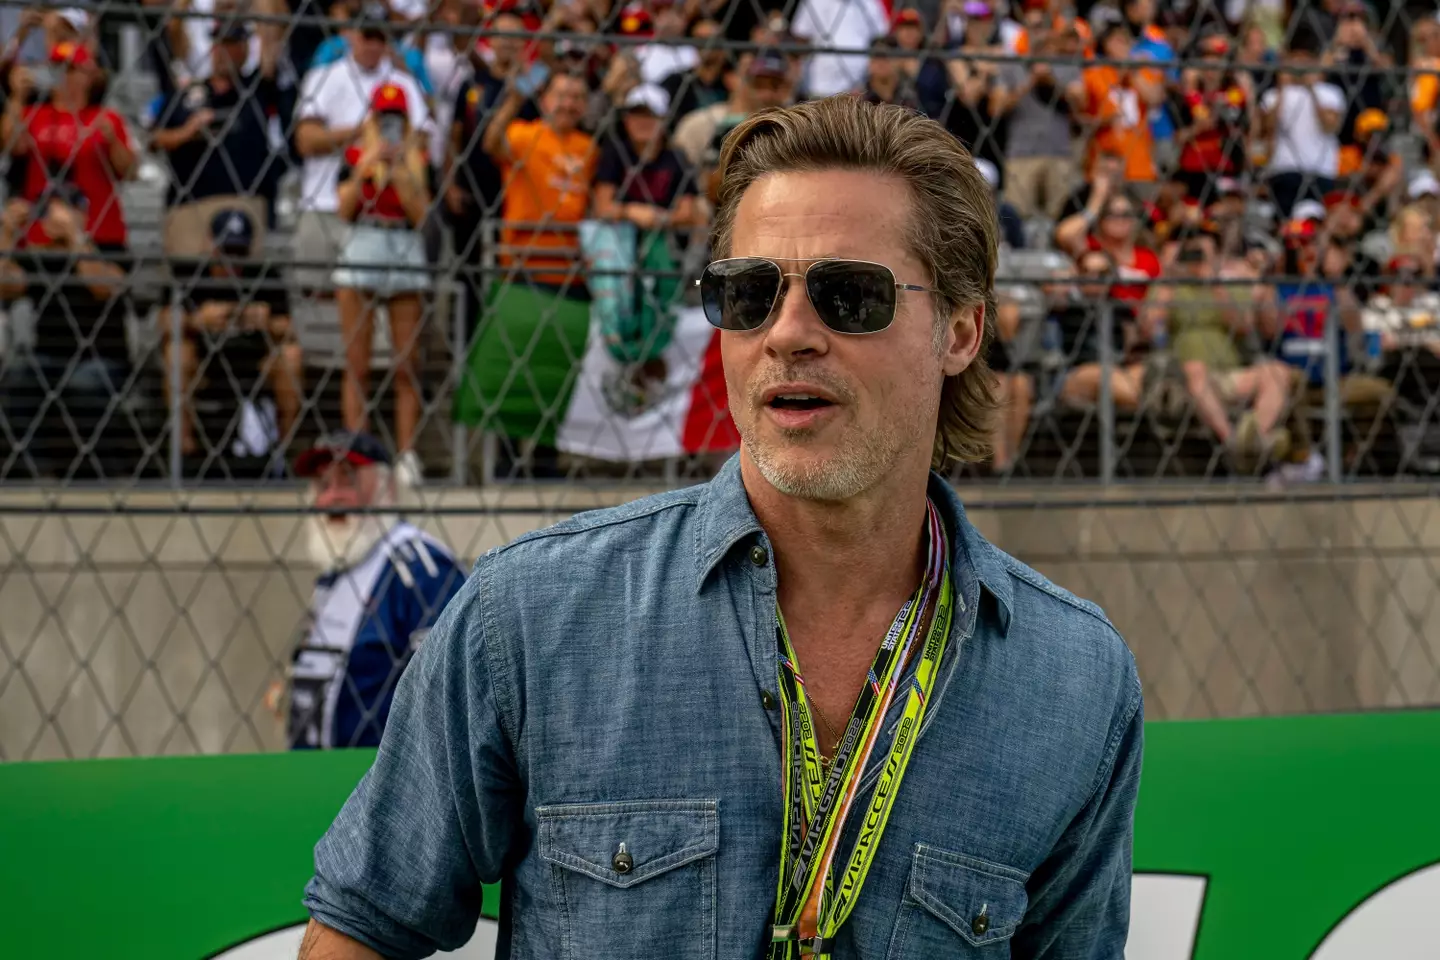 Brad Pitt got permission from Formula 1 CEO Stefano Domenicali to drive a car at the world-famous track.